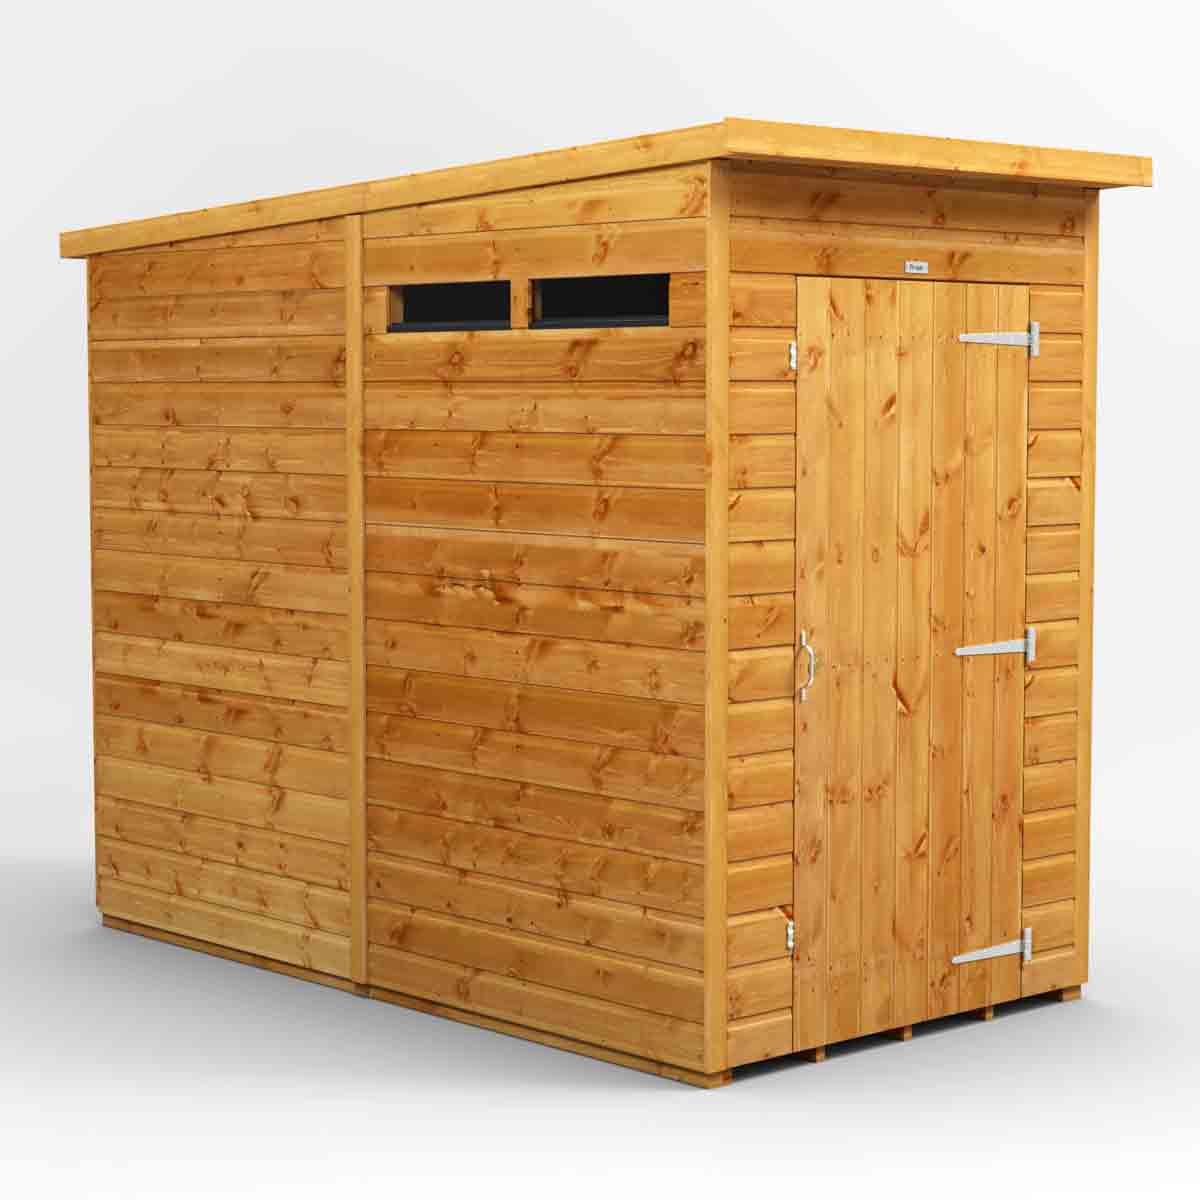 Power 4' x 8' Pent Security Shed